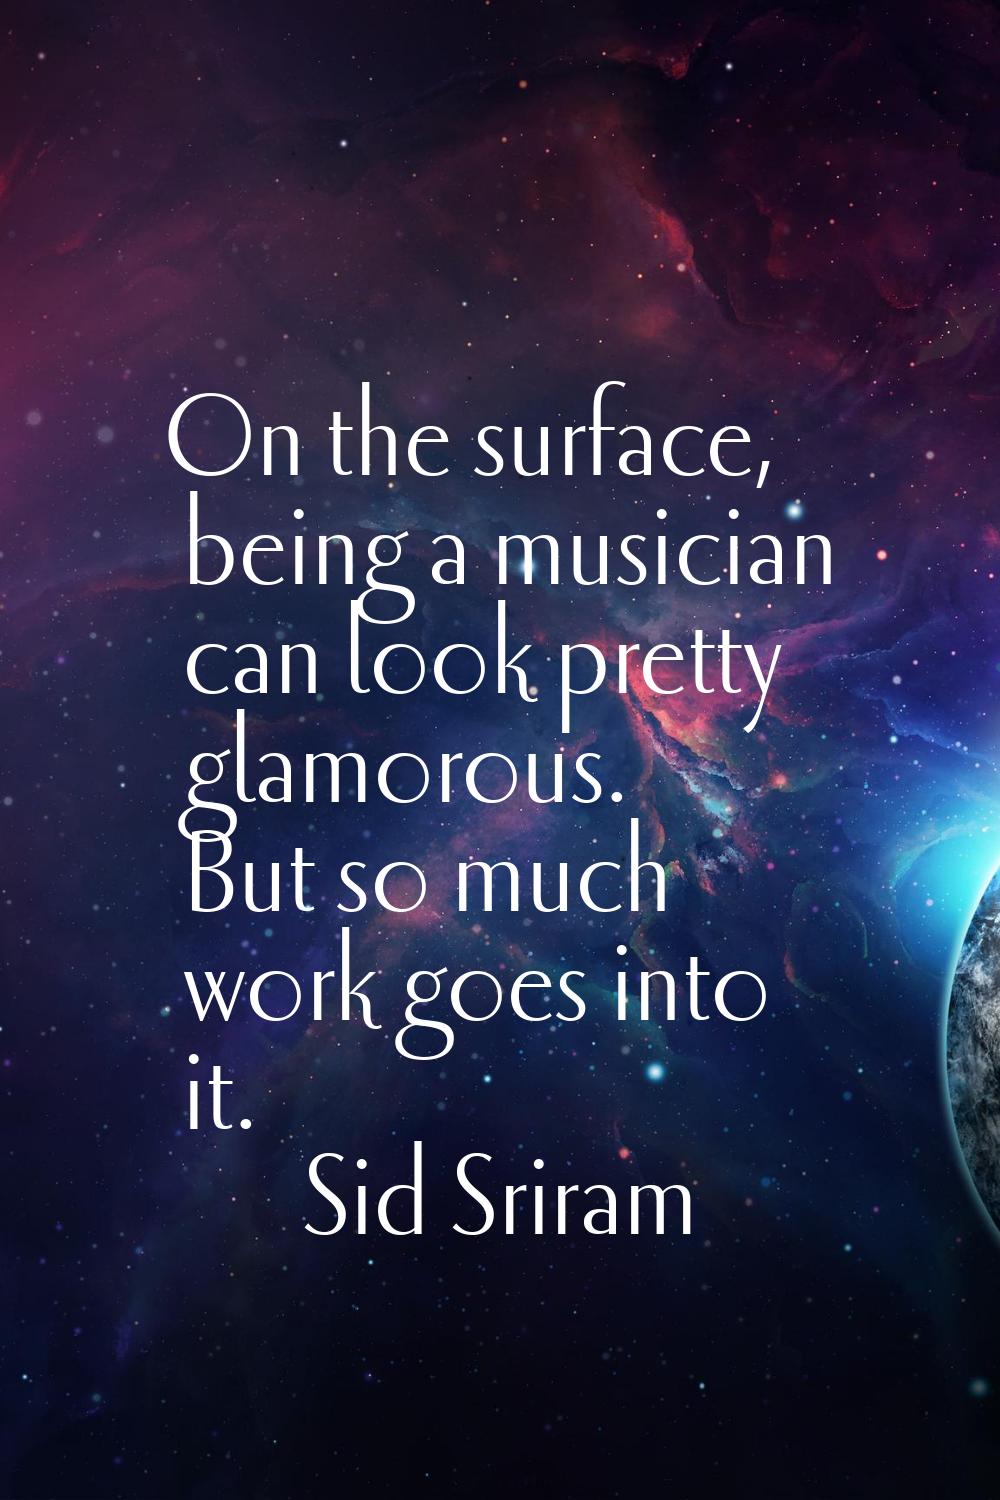 On the surface, being a musician can look pretty glamorous. But so much work goes into it.